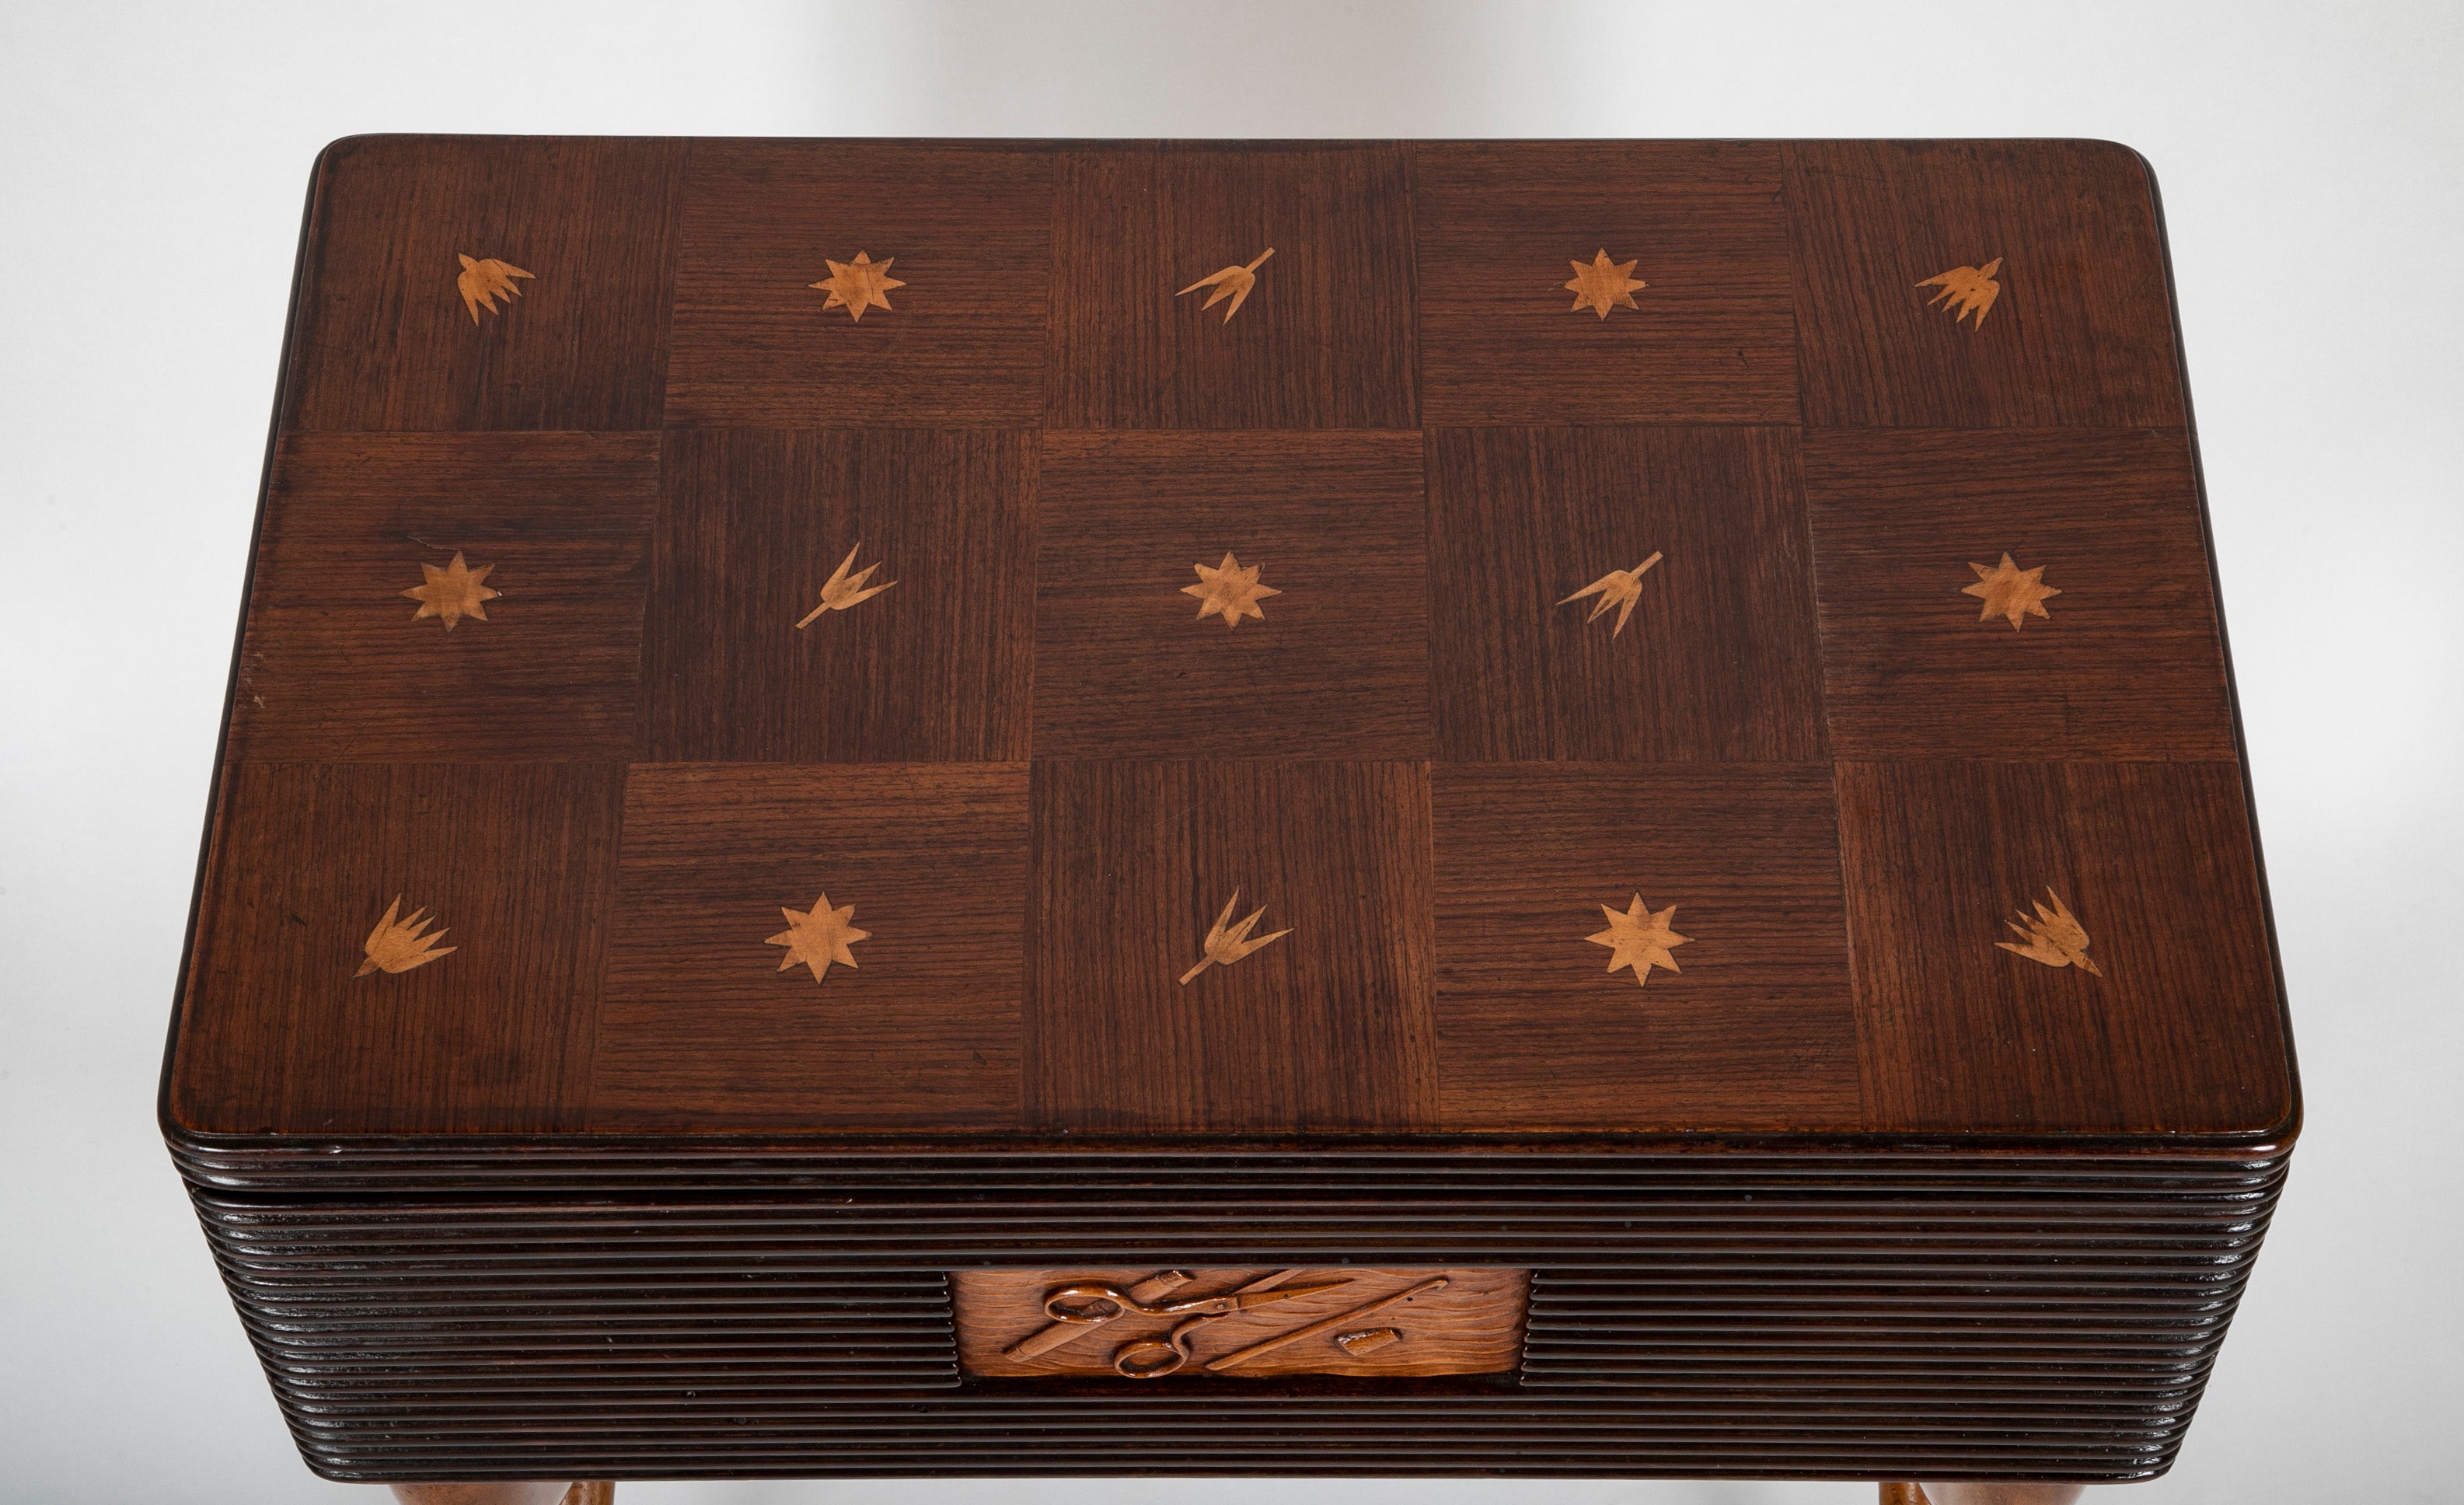 Beechwood Sewing Chest with Inlaid Top Attributed to Luigi Scremin